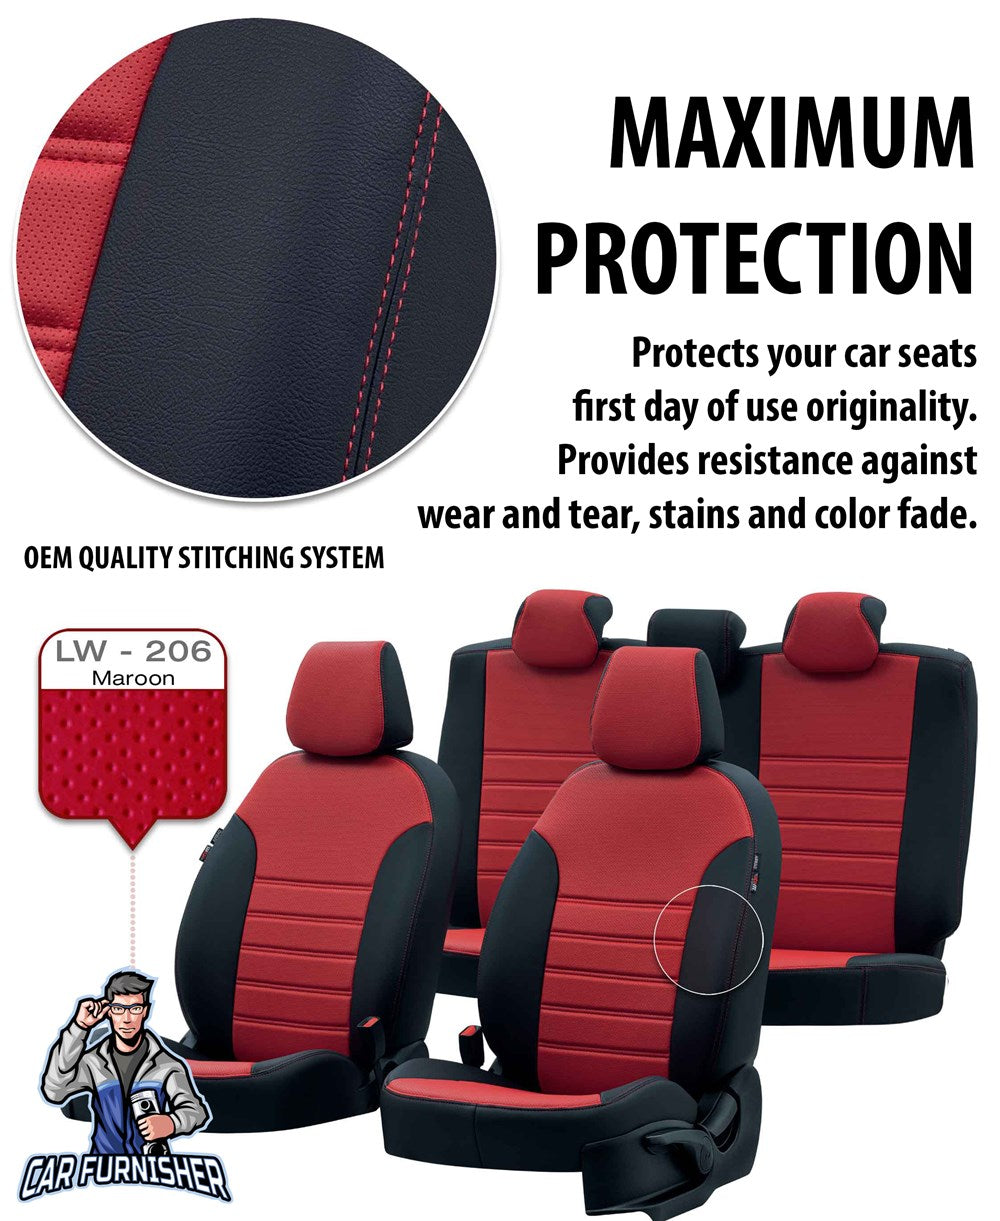 Volkswagen Crafter Seat Cover Istanbul Leather Design Black Leather